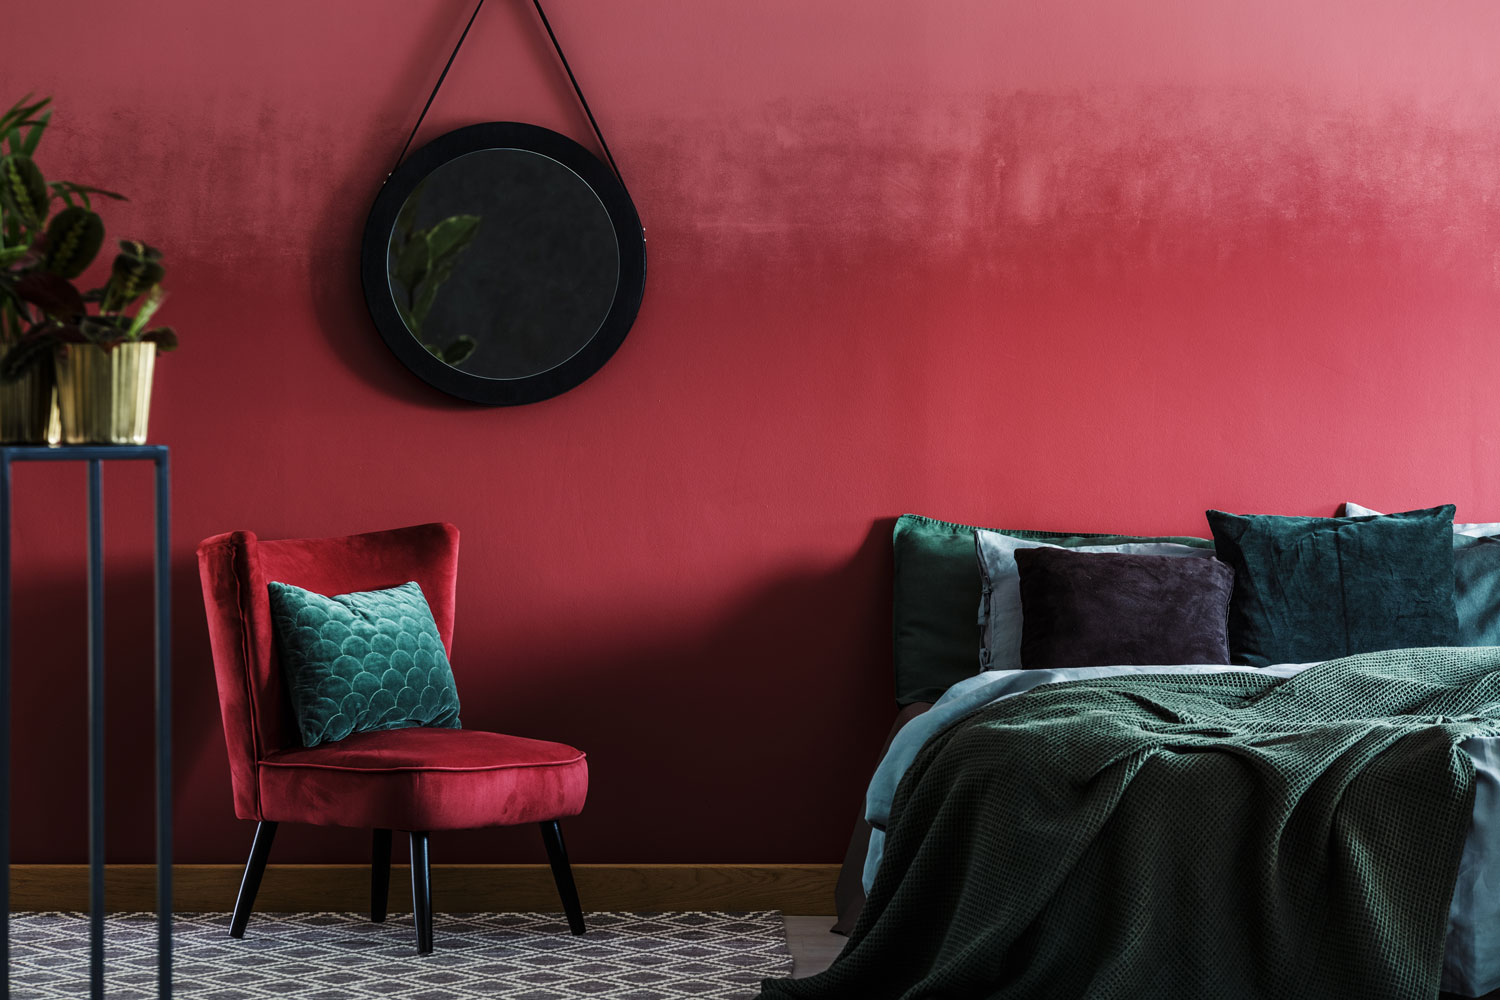 A red velvety bedroom with green beddings and a small red chair on the side